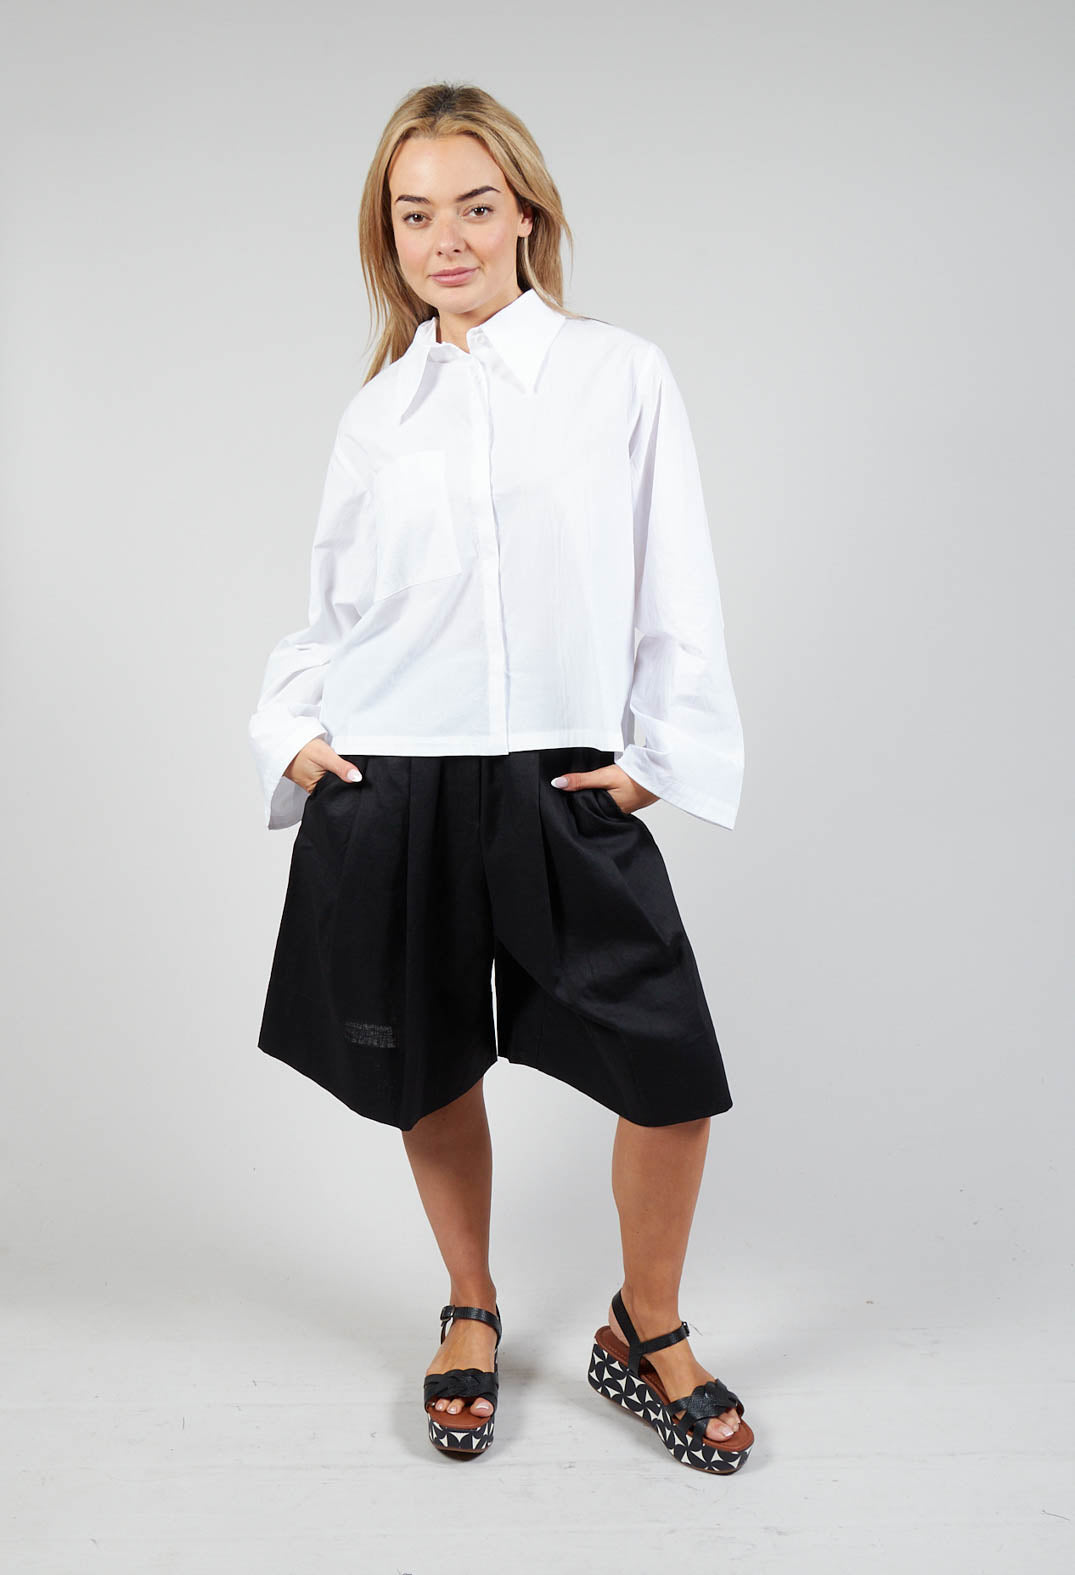 Cropped Patch Pocket Shirt in White